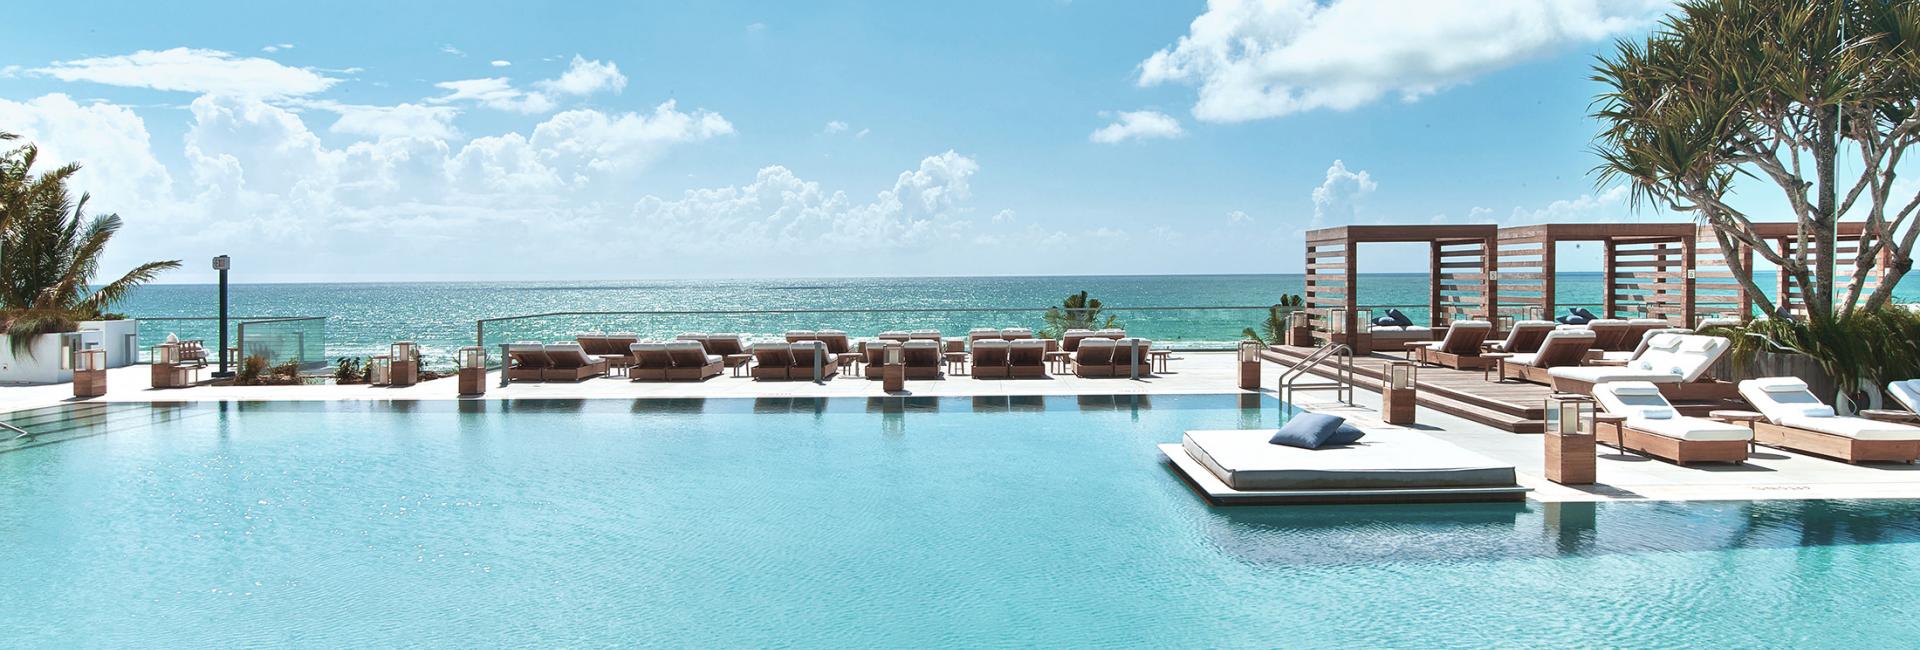 Things to Do in South Beach | 1 Hotel South Beach